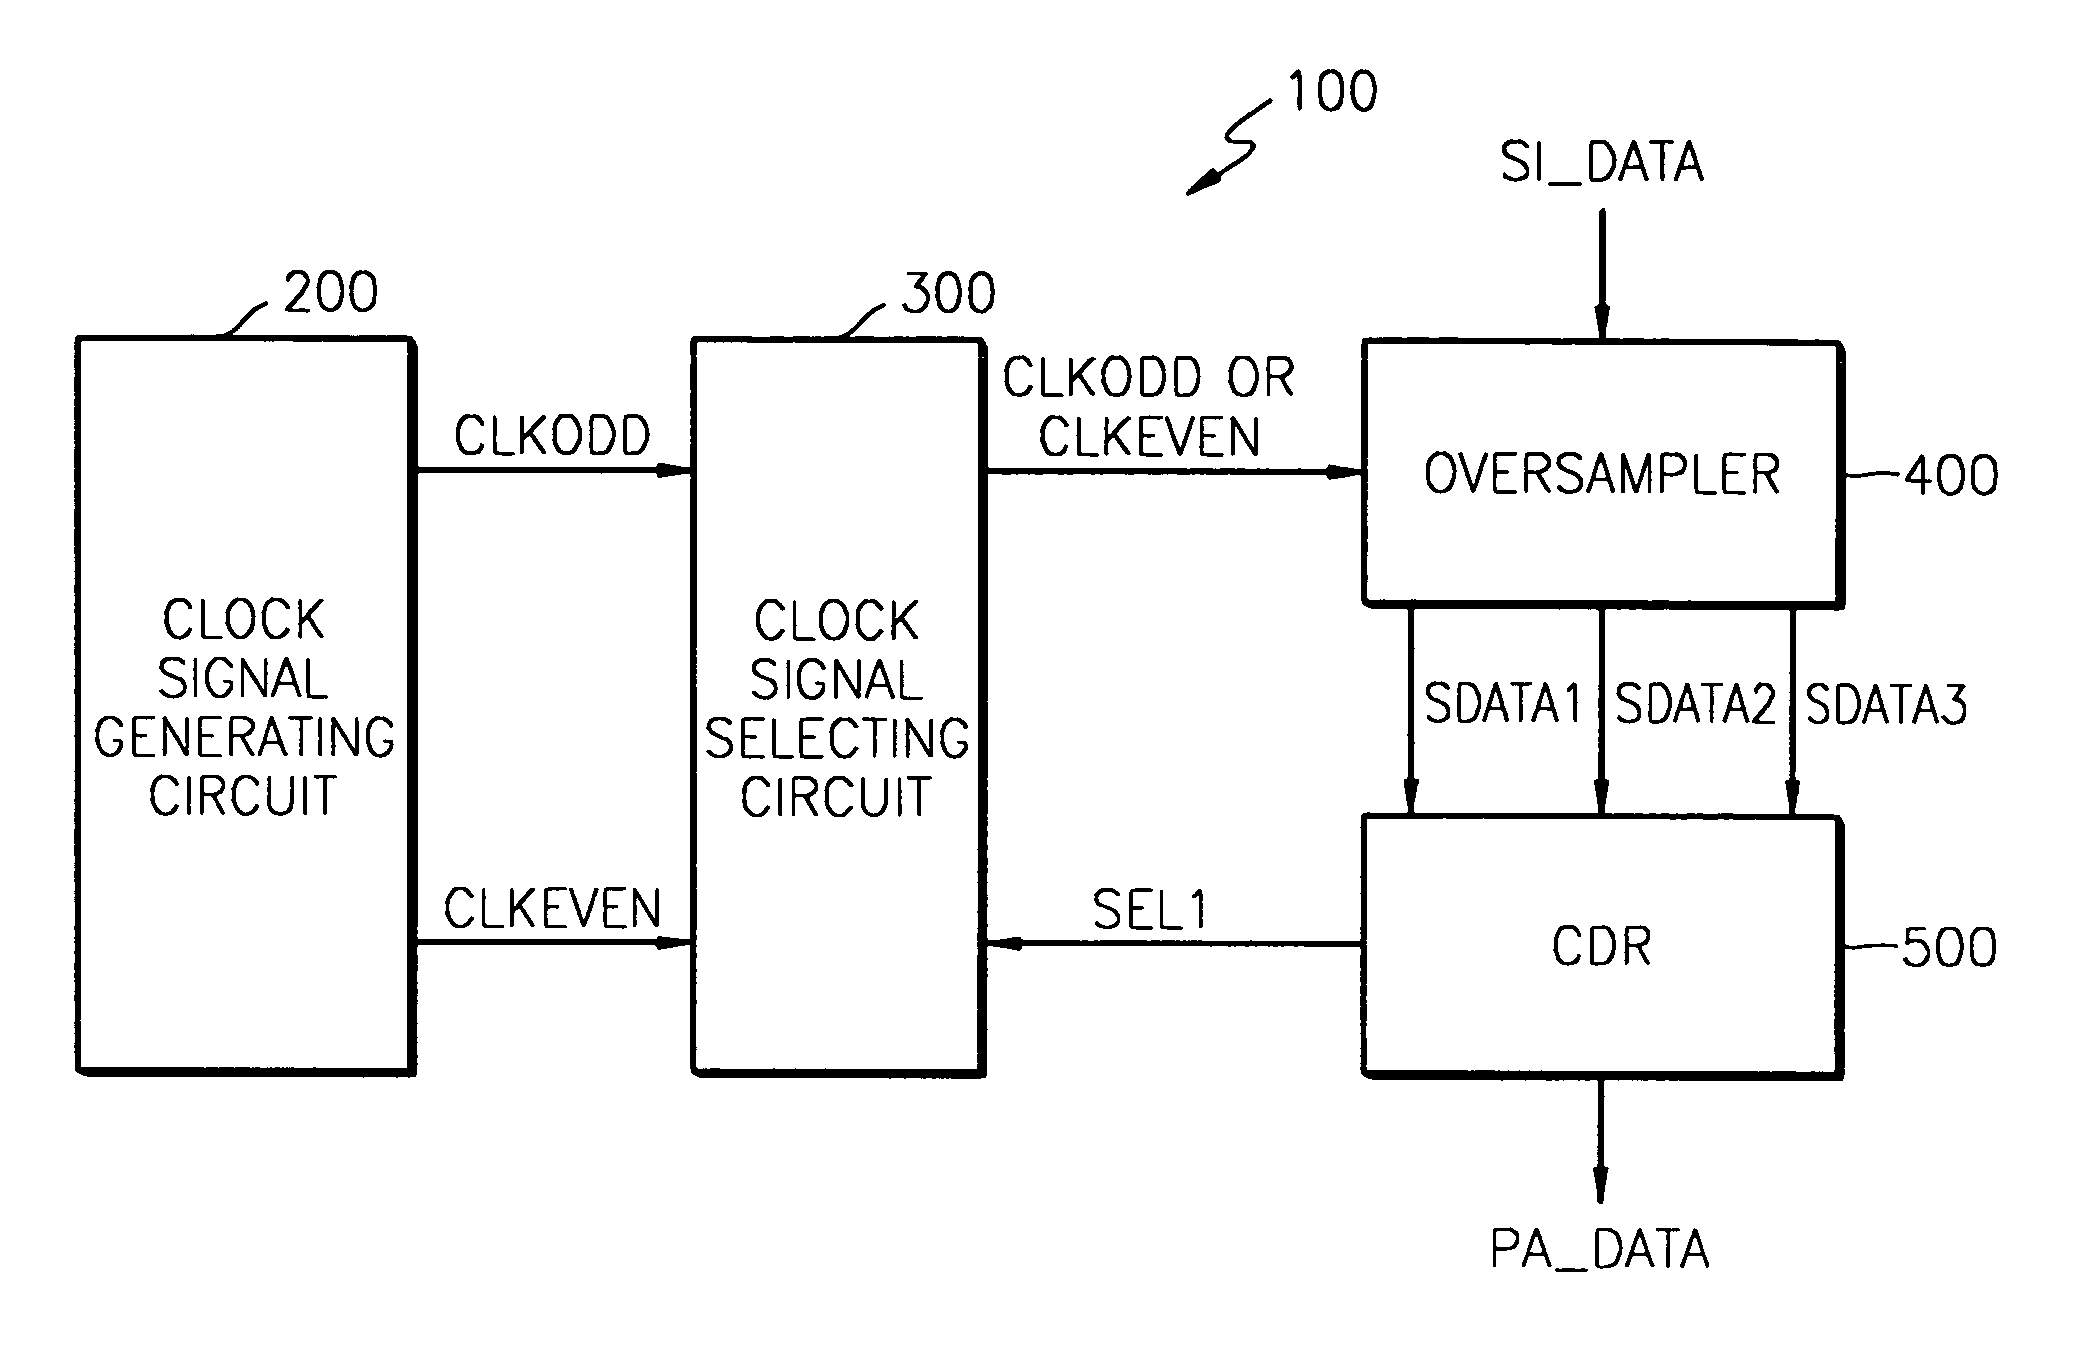 Data recovery apparatus and method for decreasing data recovery error in a high-speed serial link